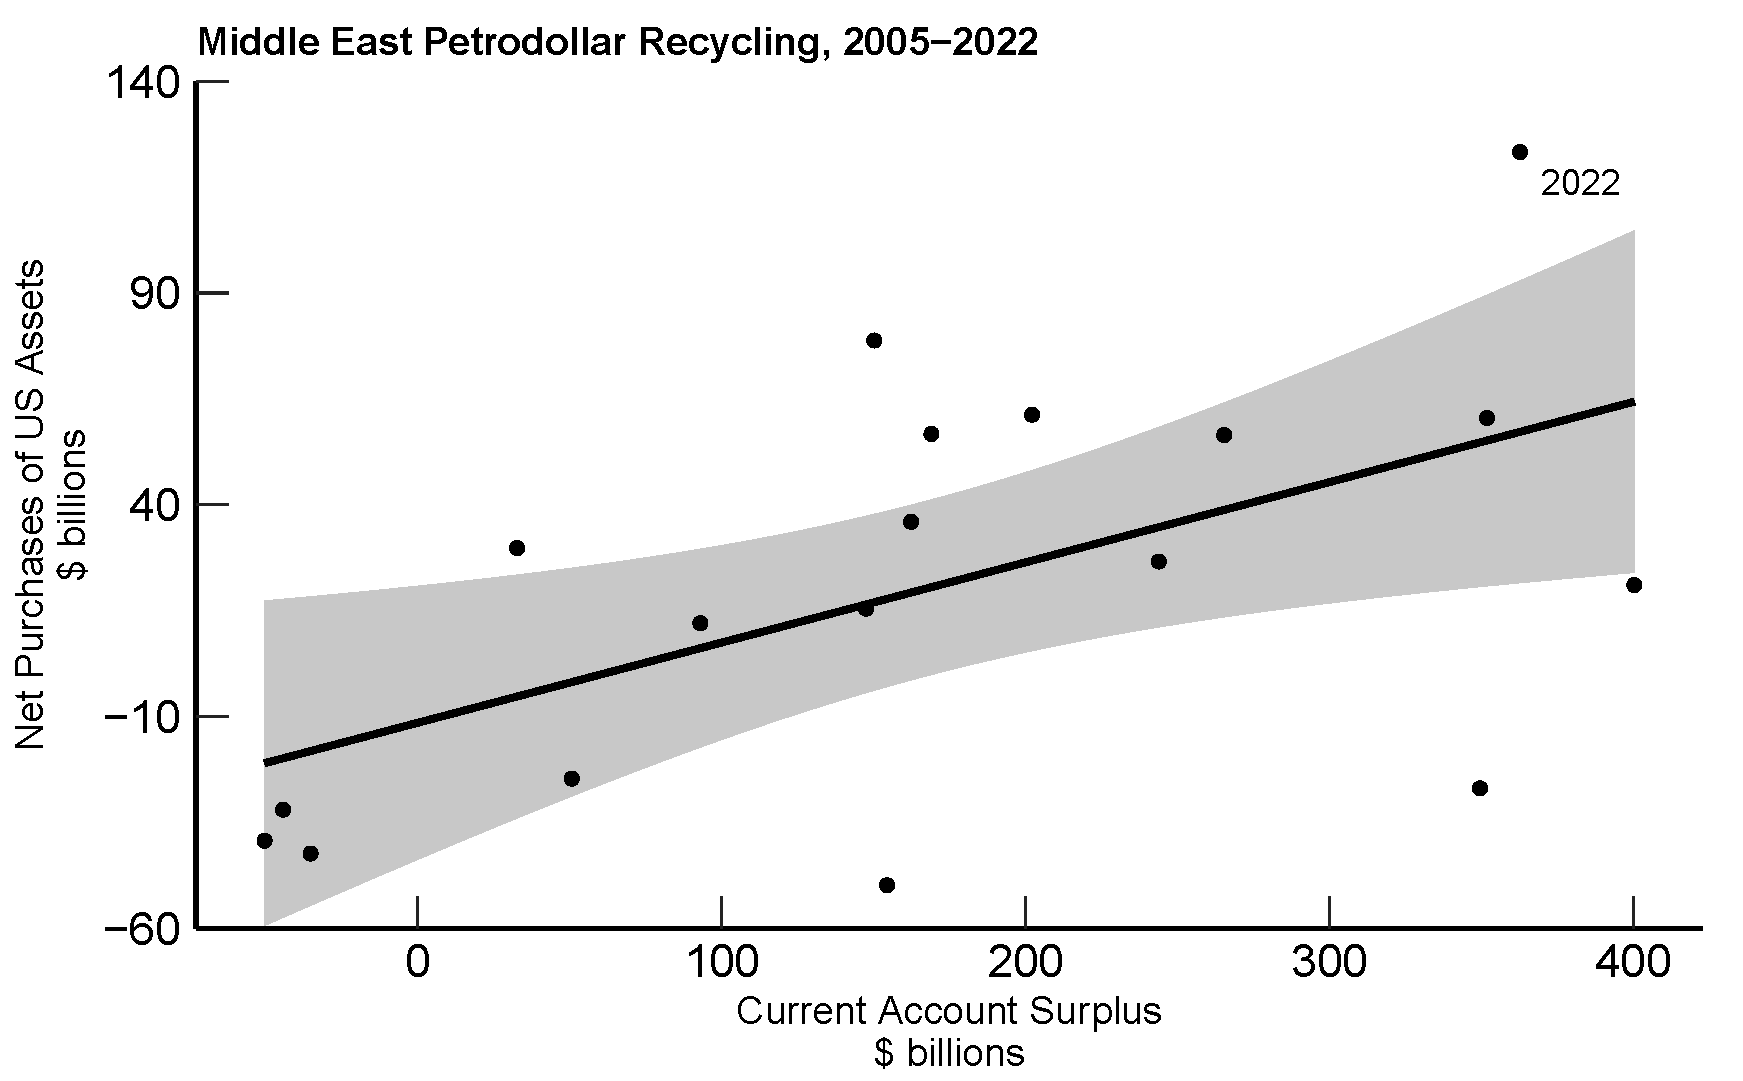 Figure 3. Middle East Petrodollar Recycling, 2005−2022. See accessible link for data.